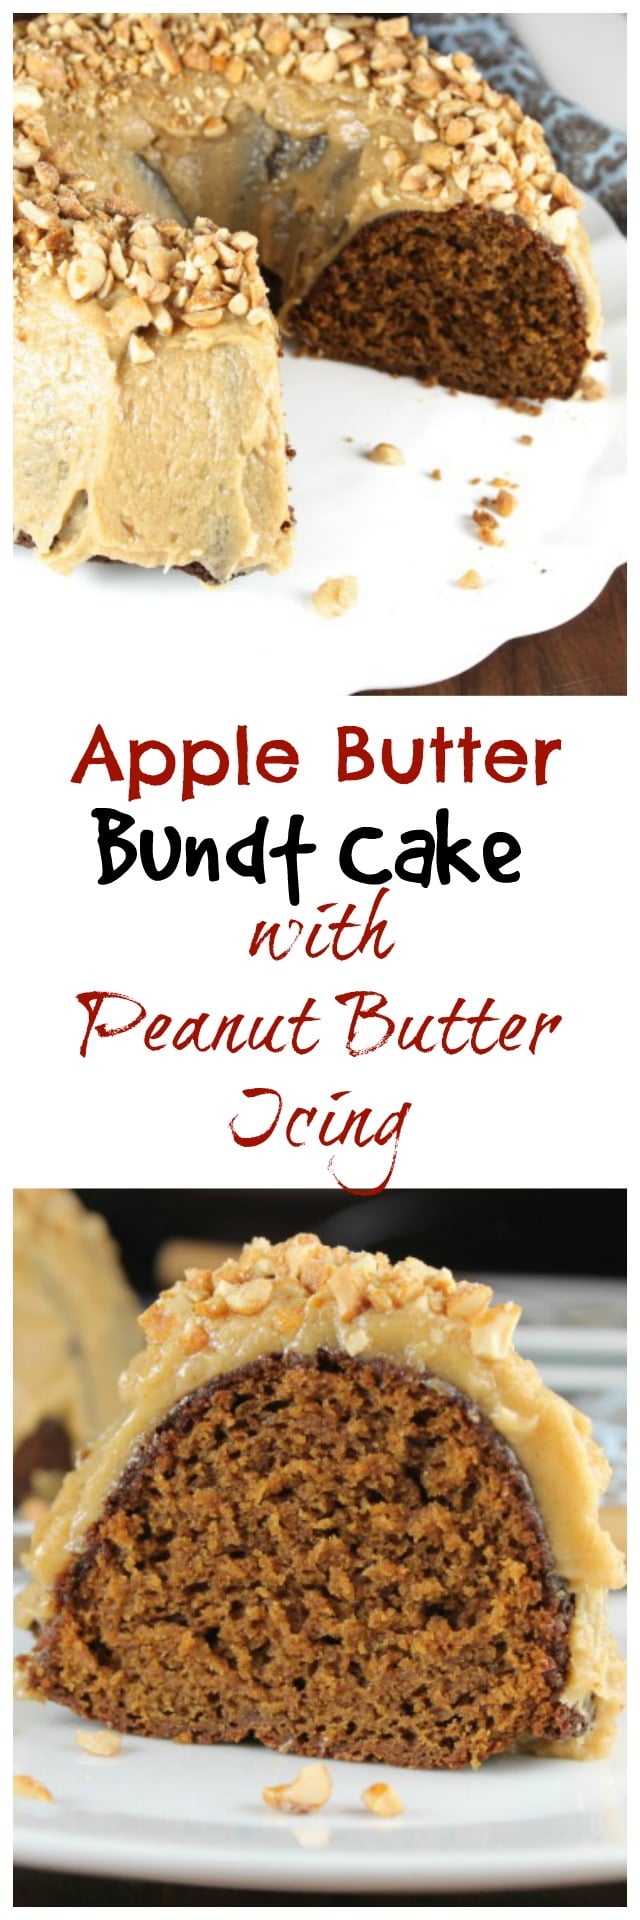 Apple Butter Bundt Cake with Peanut Butter Icing Recipe from MissintheKitchen.com